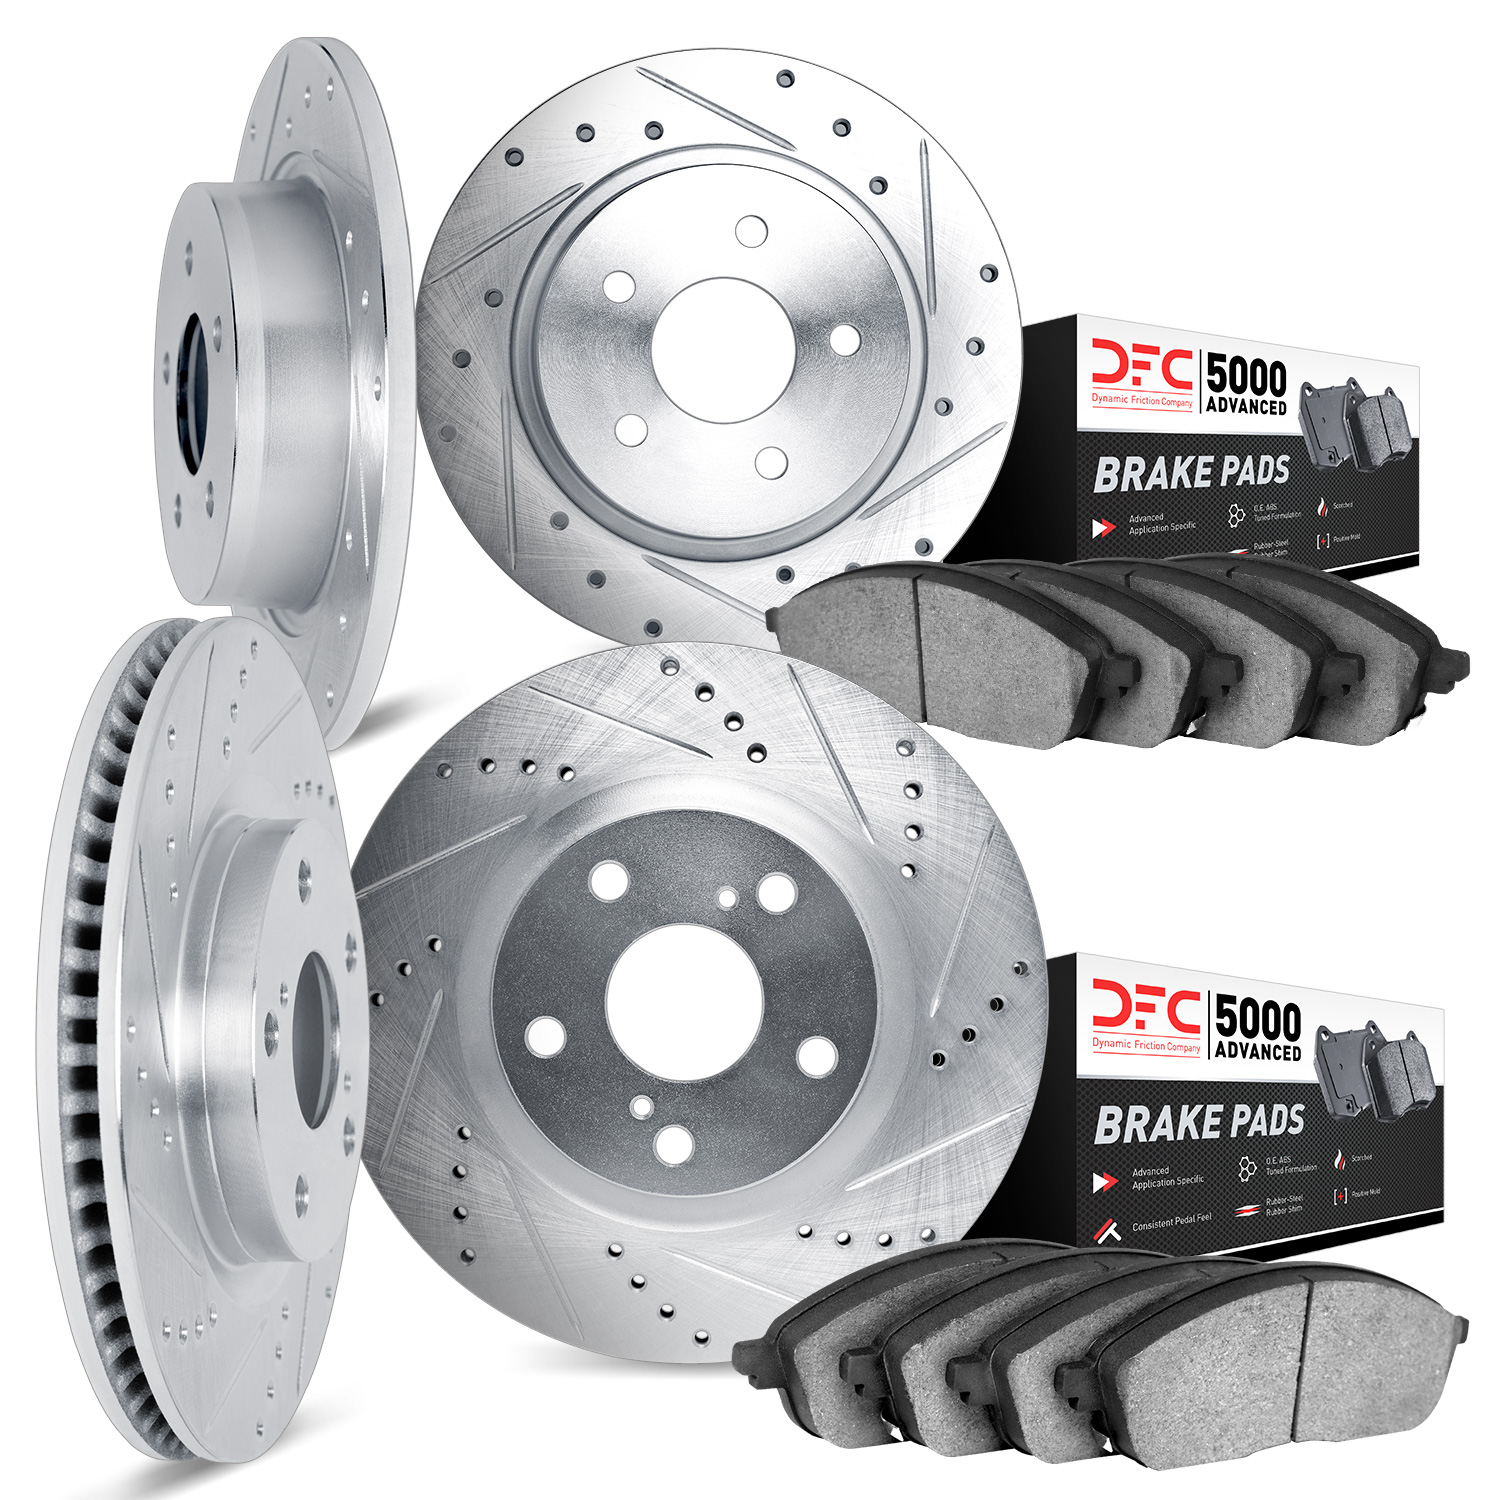 7504-07003 Drilled/Slotted Brake Rotors w/5000 Advanced Brake Pads Kit [Silver], 2014-2019 Mopar, Position: Front and Rear